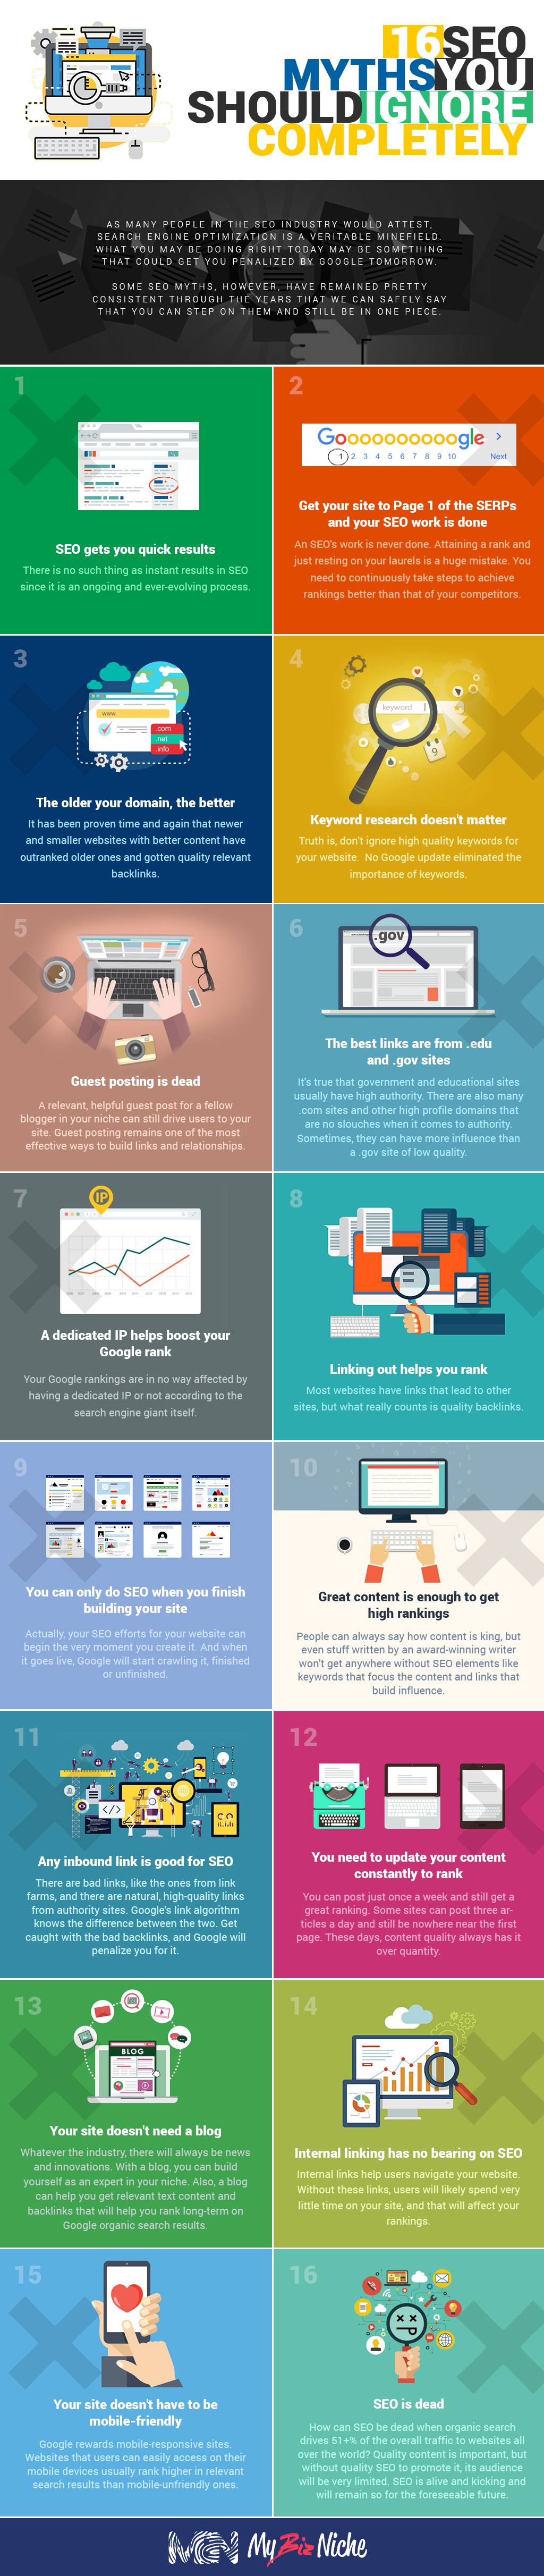 16-SEO-Myths-You-Should-Ignore-Completely-Infographic